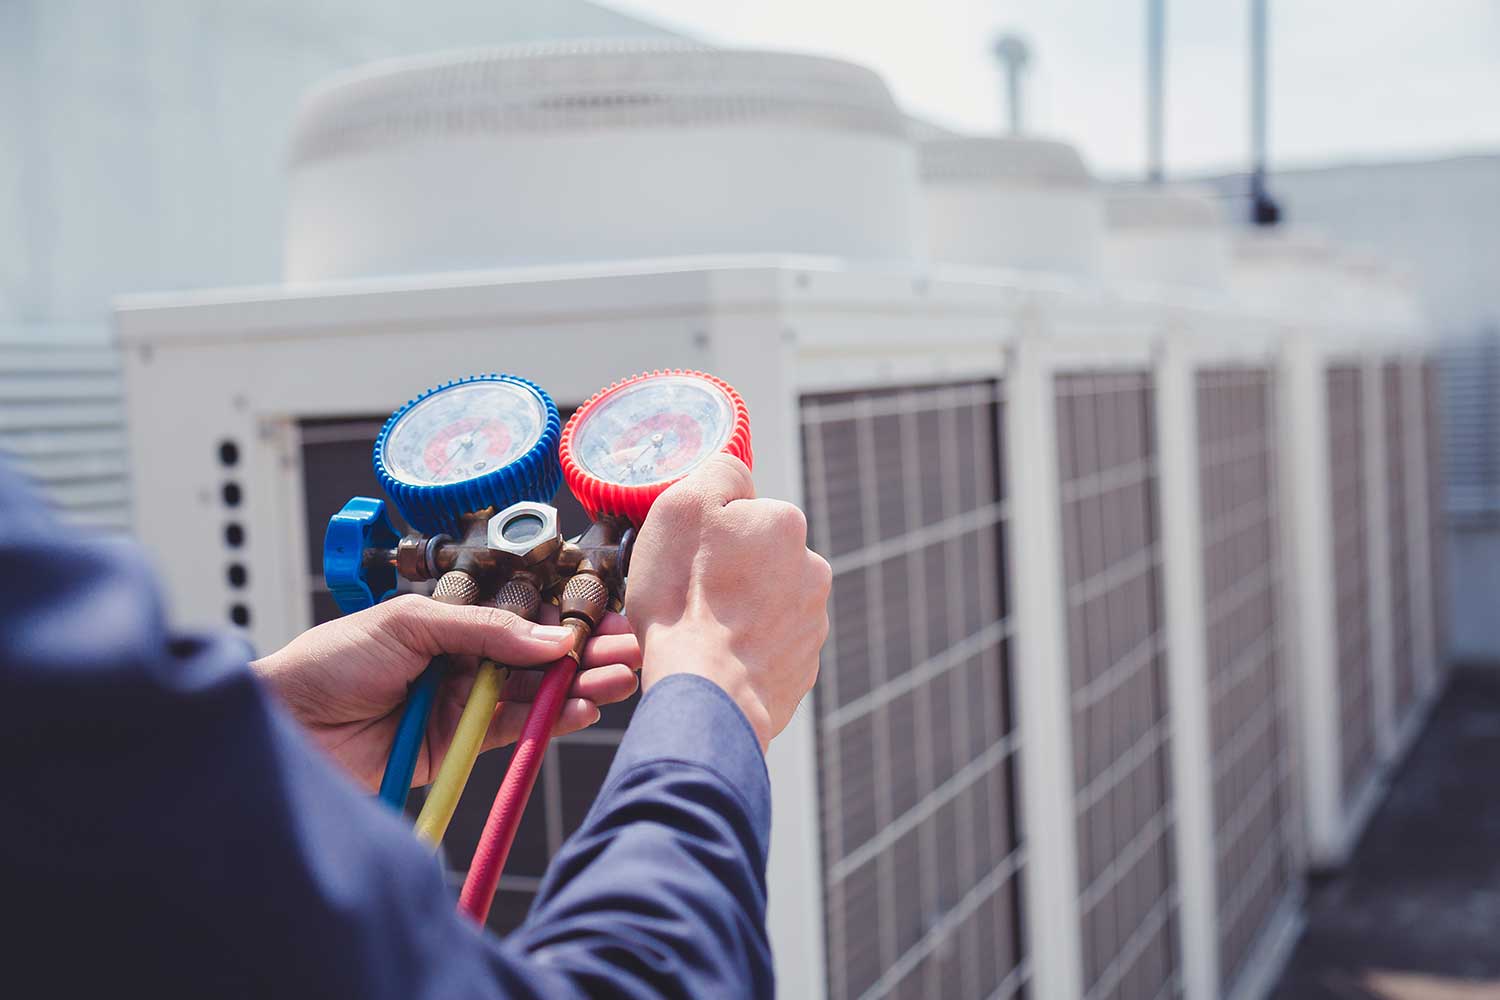 Taking care of your HVAC system is important